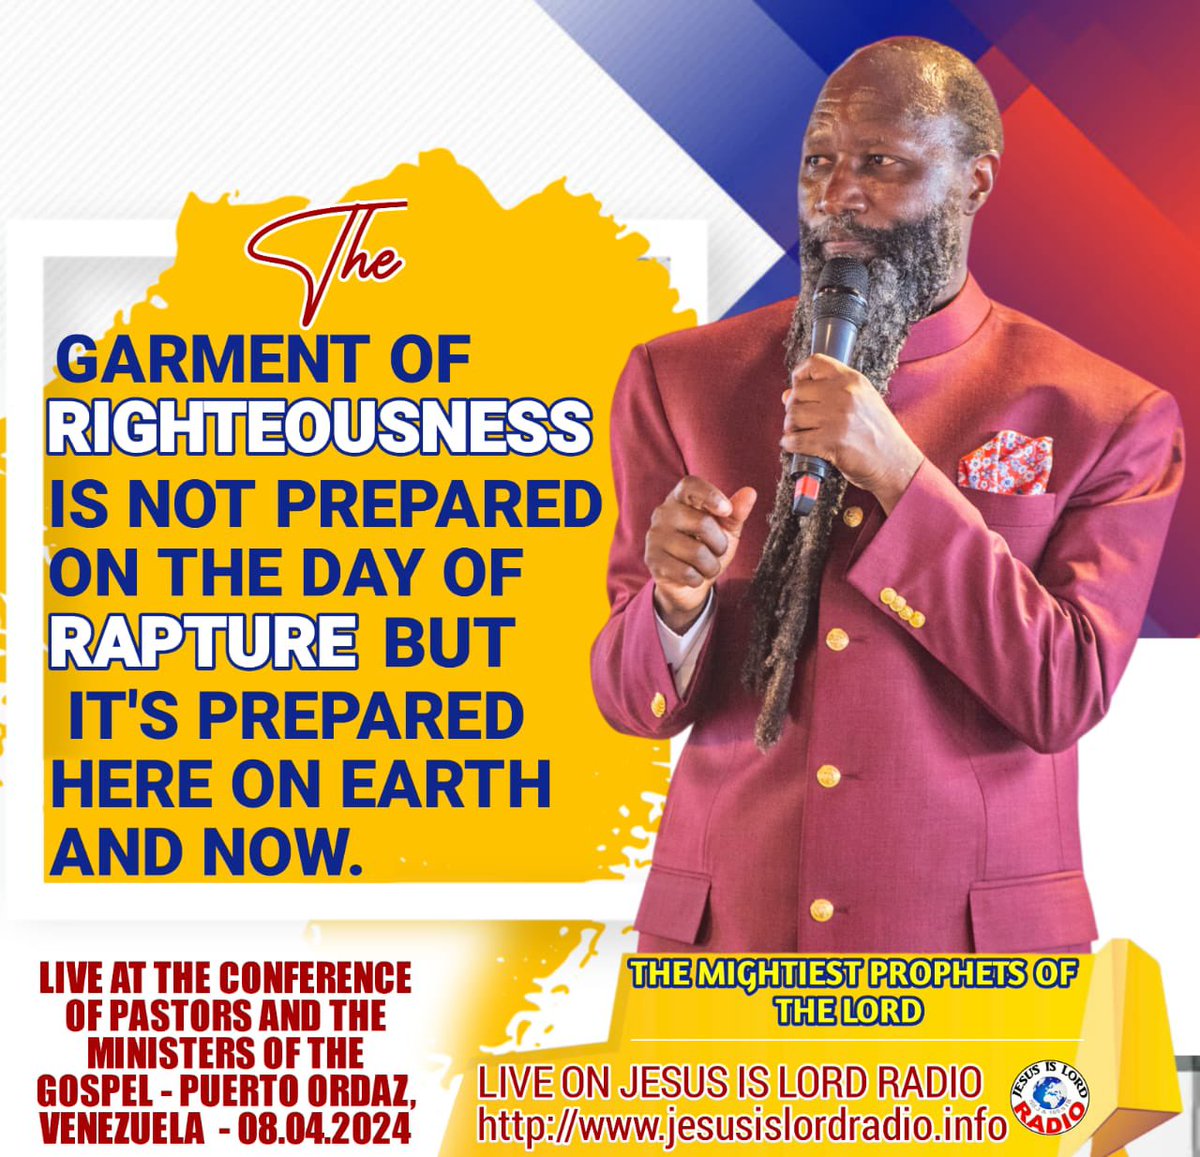 @LouisLupo4 Every time GOD judged sin, HE has separated the righteous from the wicked! HE will do it again

WE MUST PREPARE FOR GOD TO RESCUE THE RIGHTEOUS! THE MESSIAH IS COMING! 

#BlessedAnnouncement